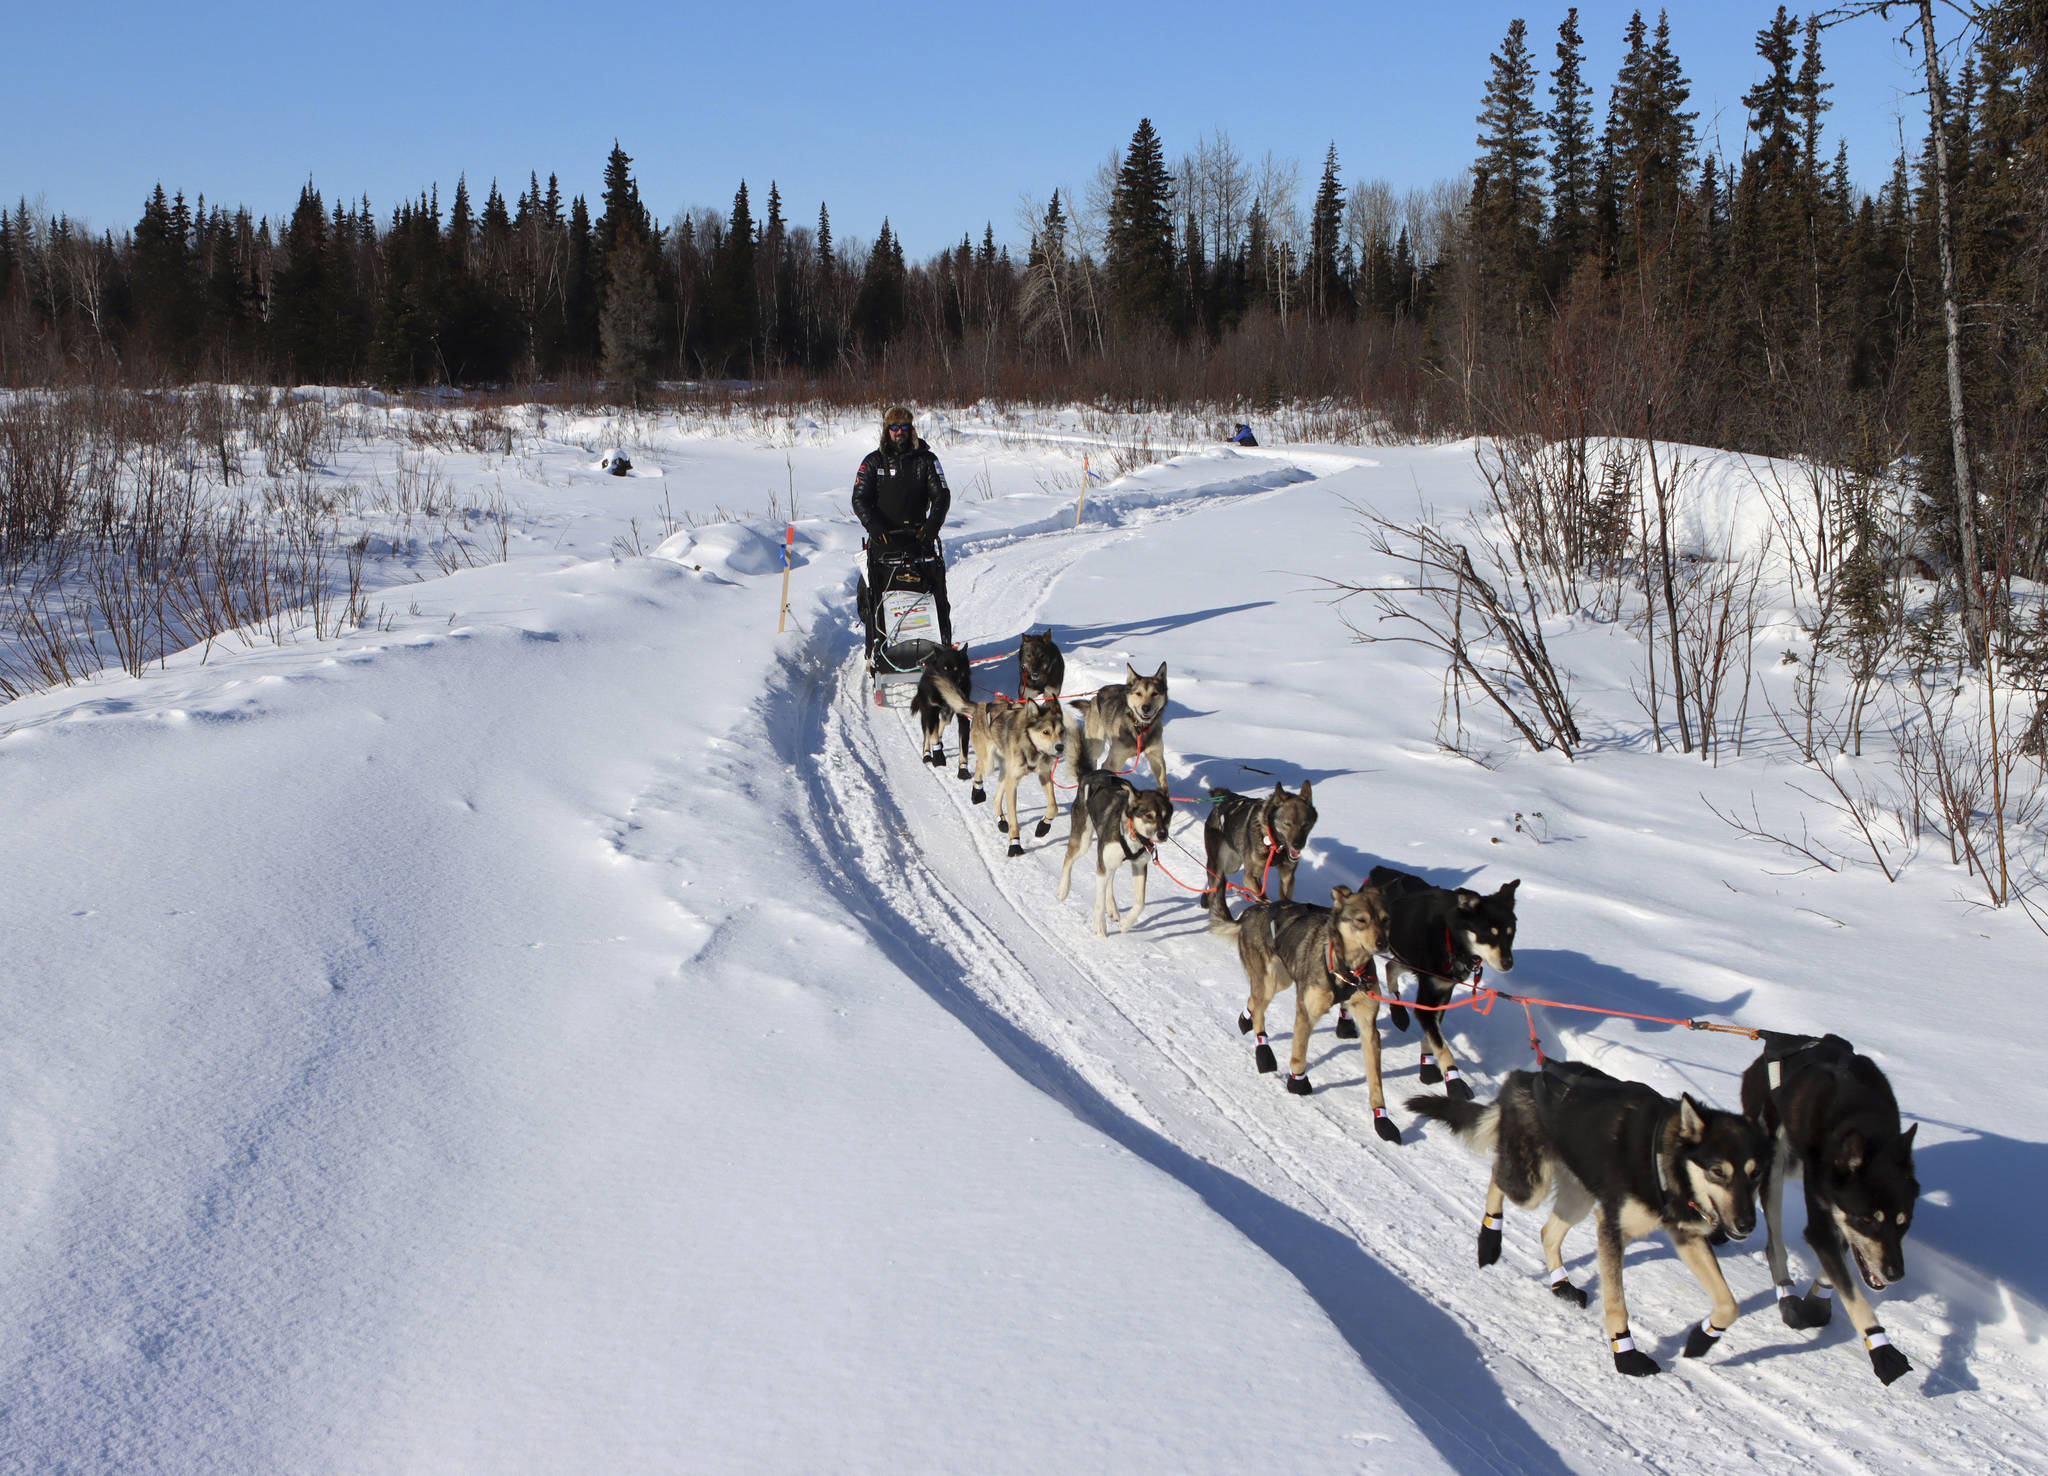 Pete Kaiser leaves the Ophir, Alaska, checkpoint with his dog team during the Iditarod Trail Sled Dog Race on Friday, March 12, 2021. (Zachariah Hughes/Anchorage Daily News via AP, Pool)